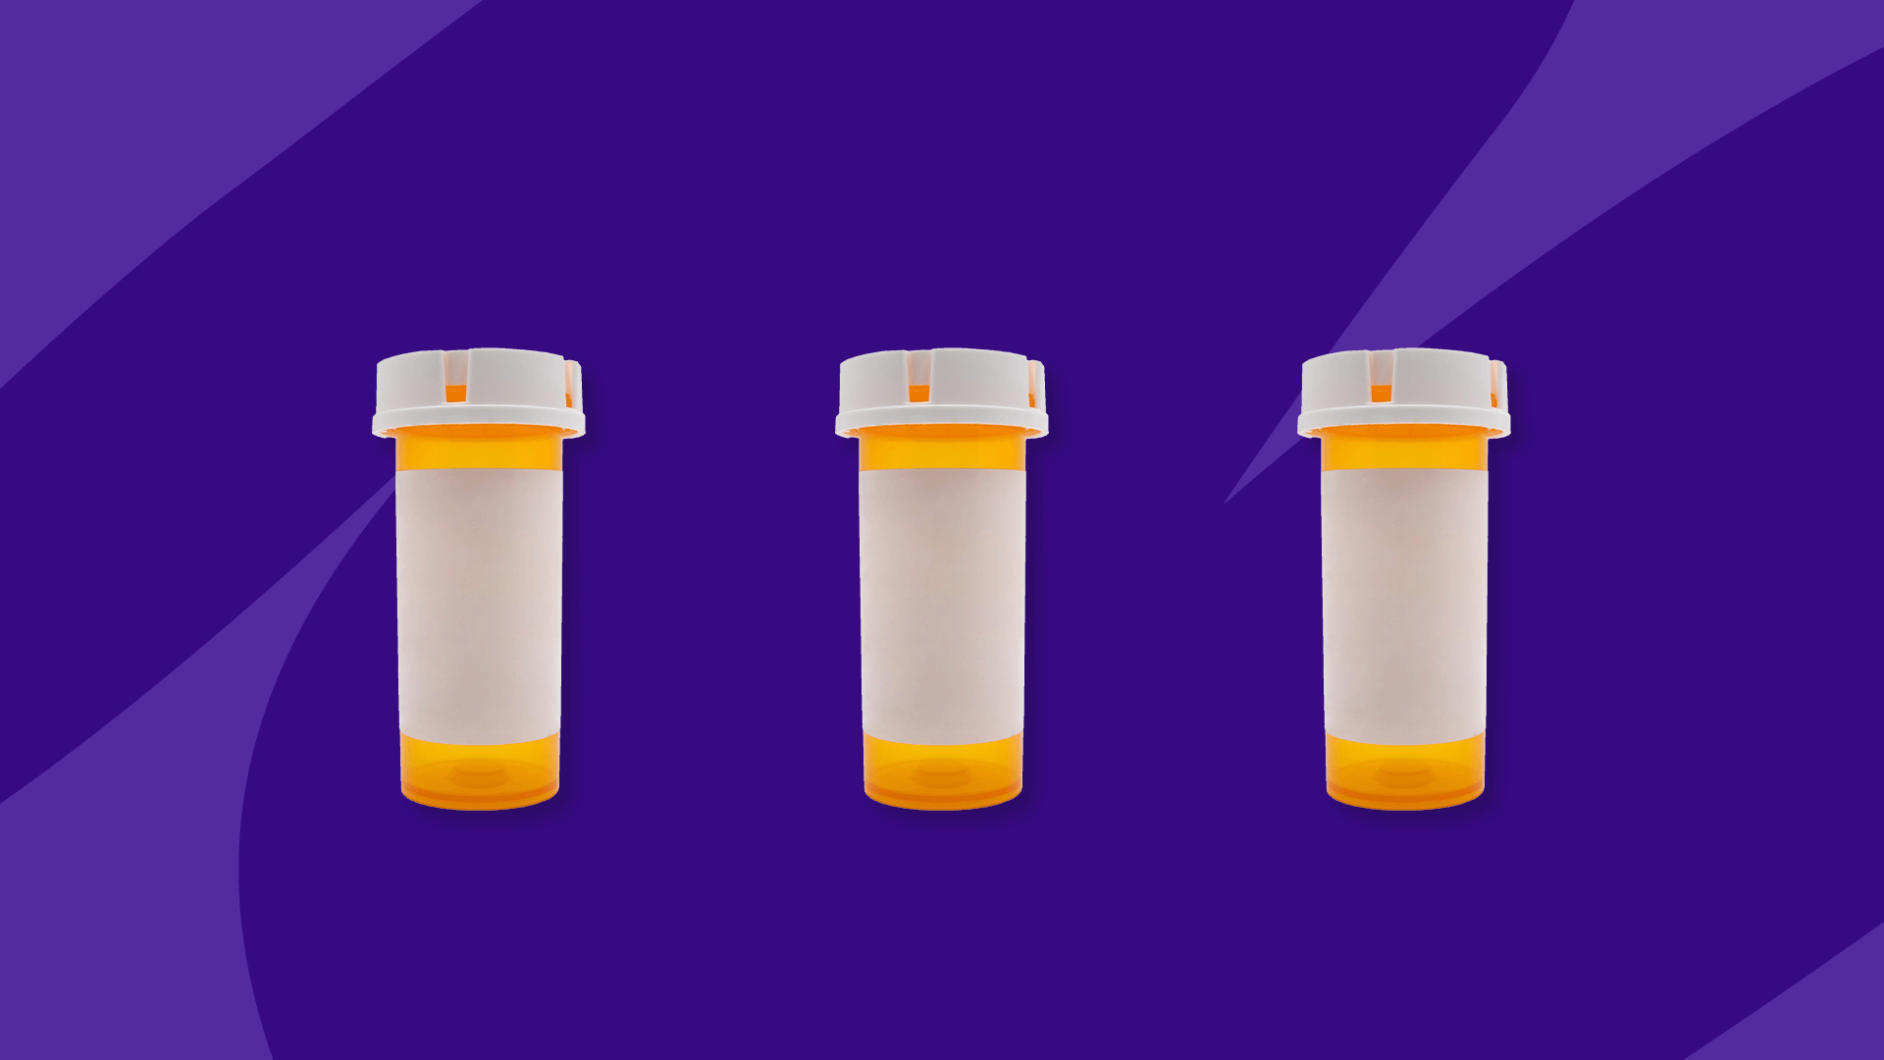 Rx pill bottles: What can I take instead of cyclobenzaprine?